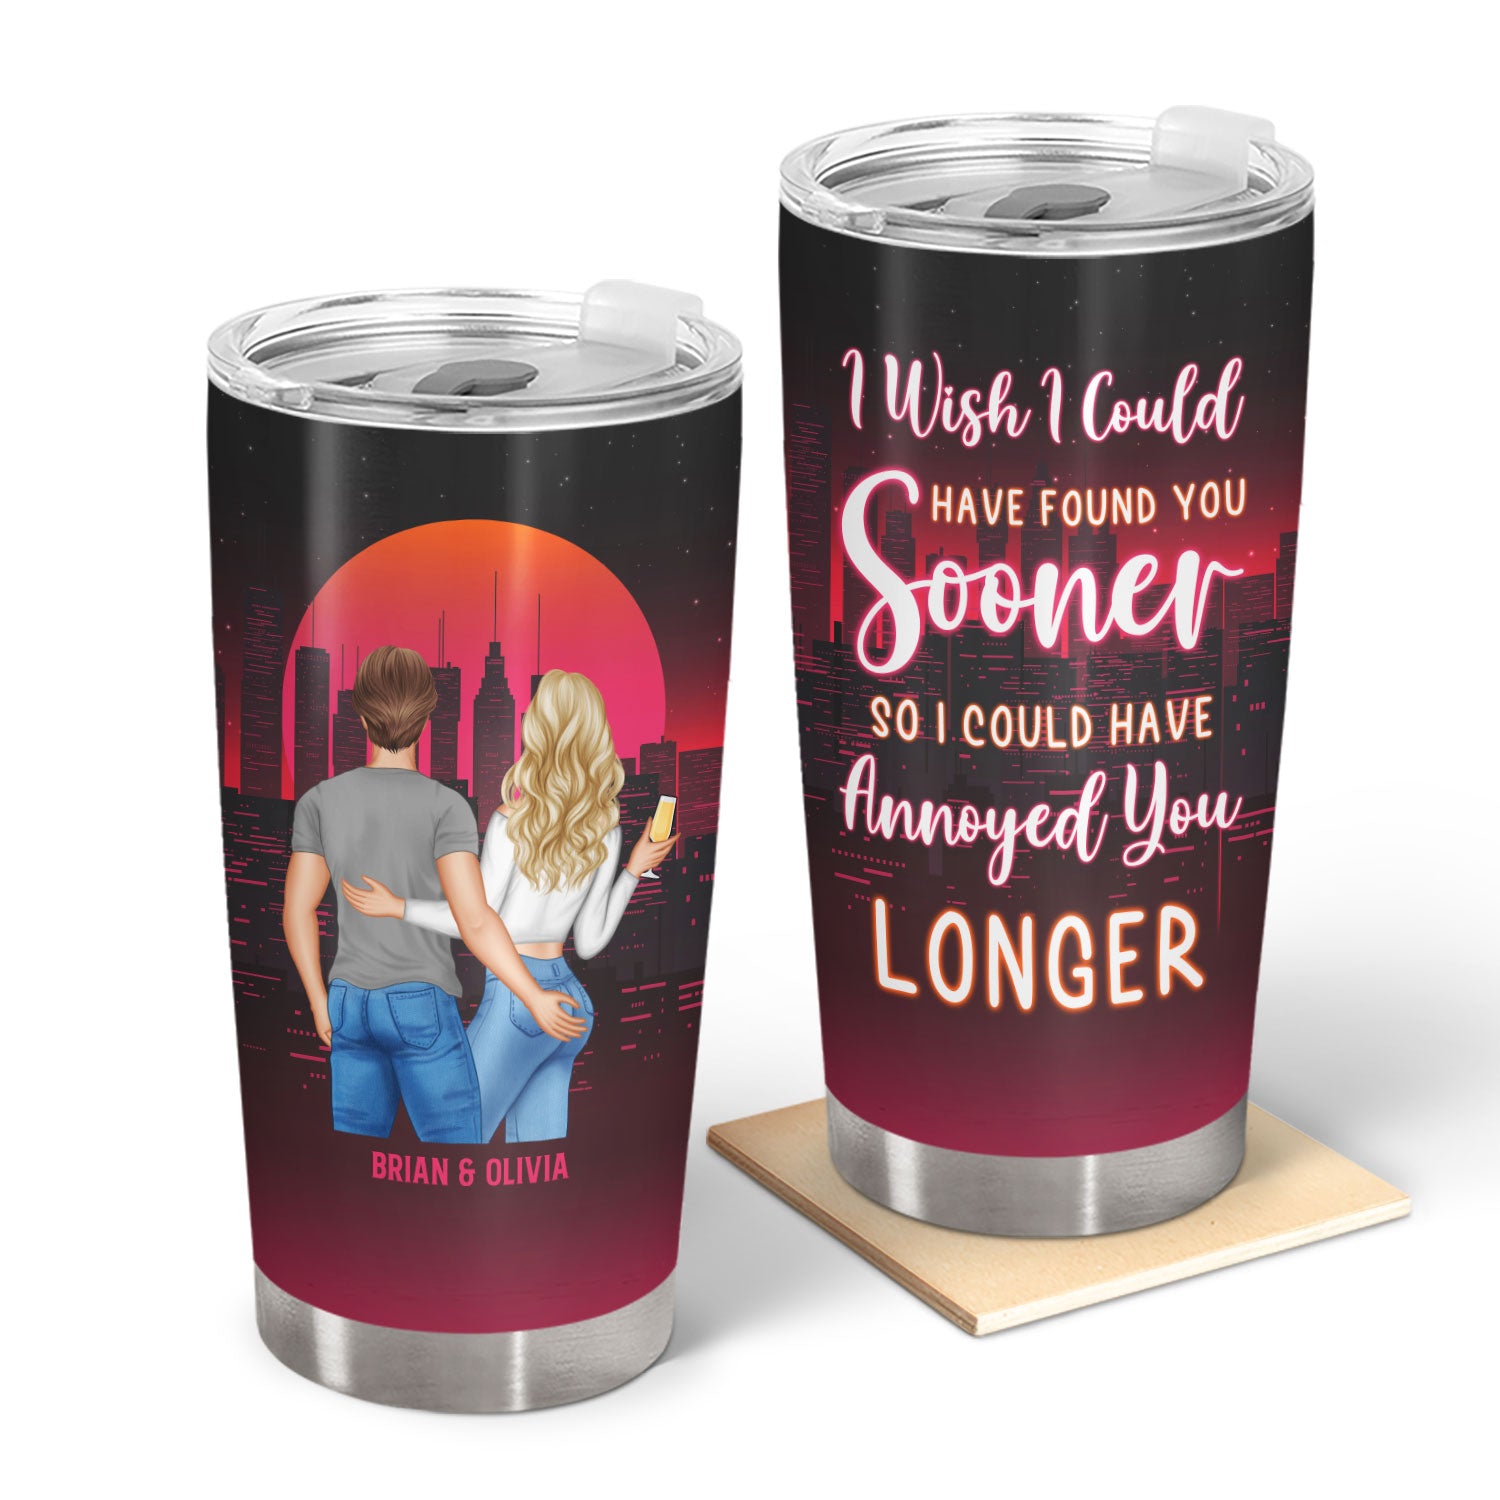 Found You Sooner Annoyed You Longer - Gift For Couples - Personalized Custom Tumbler